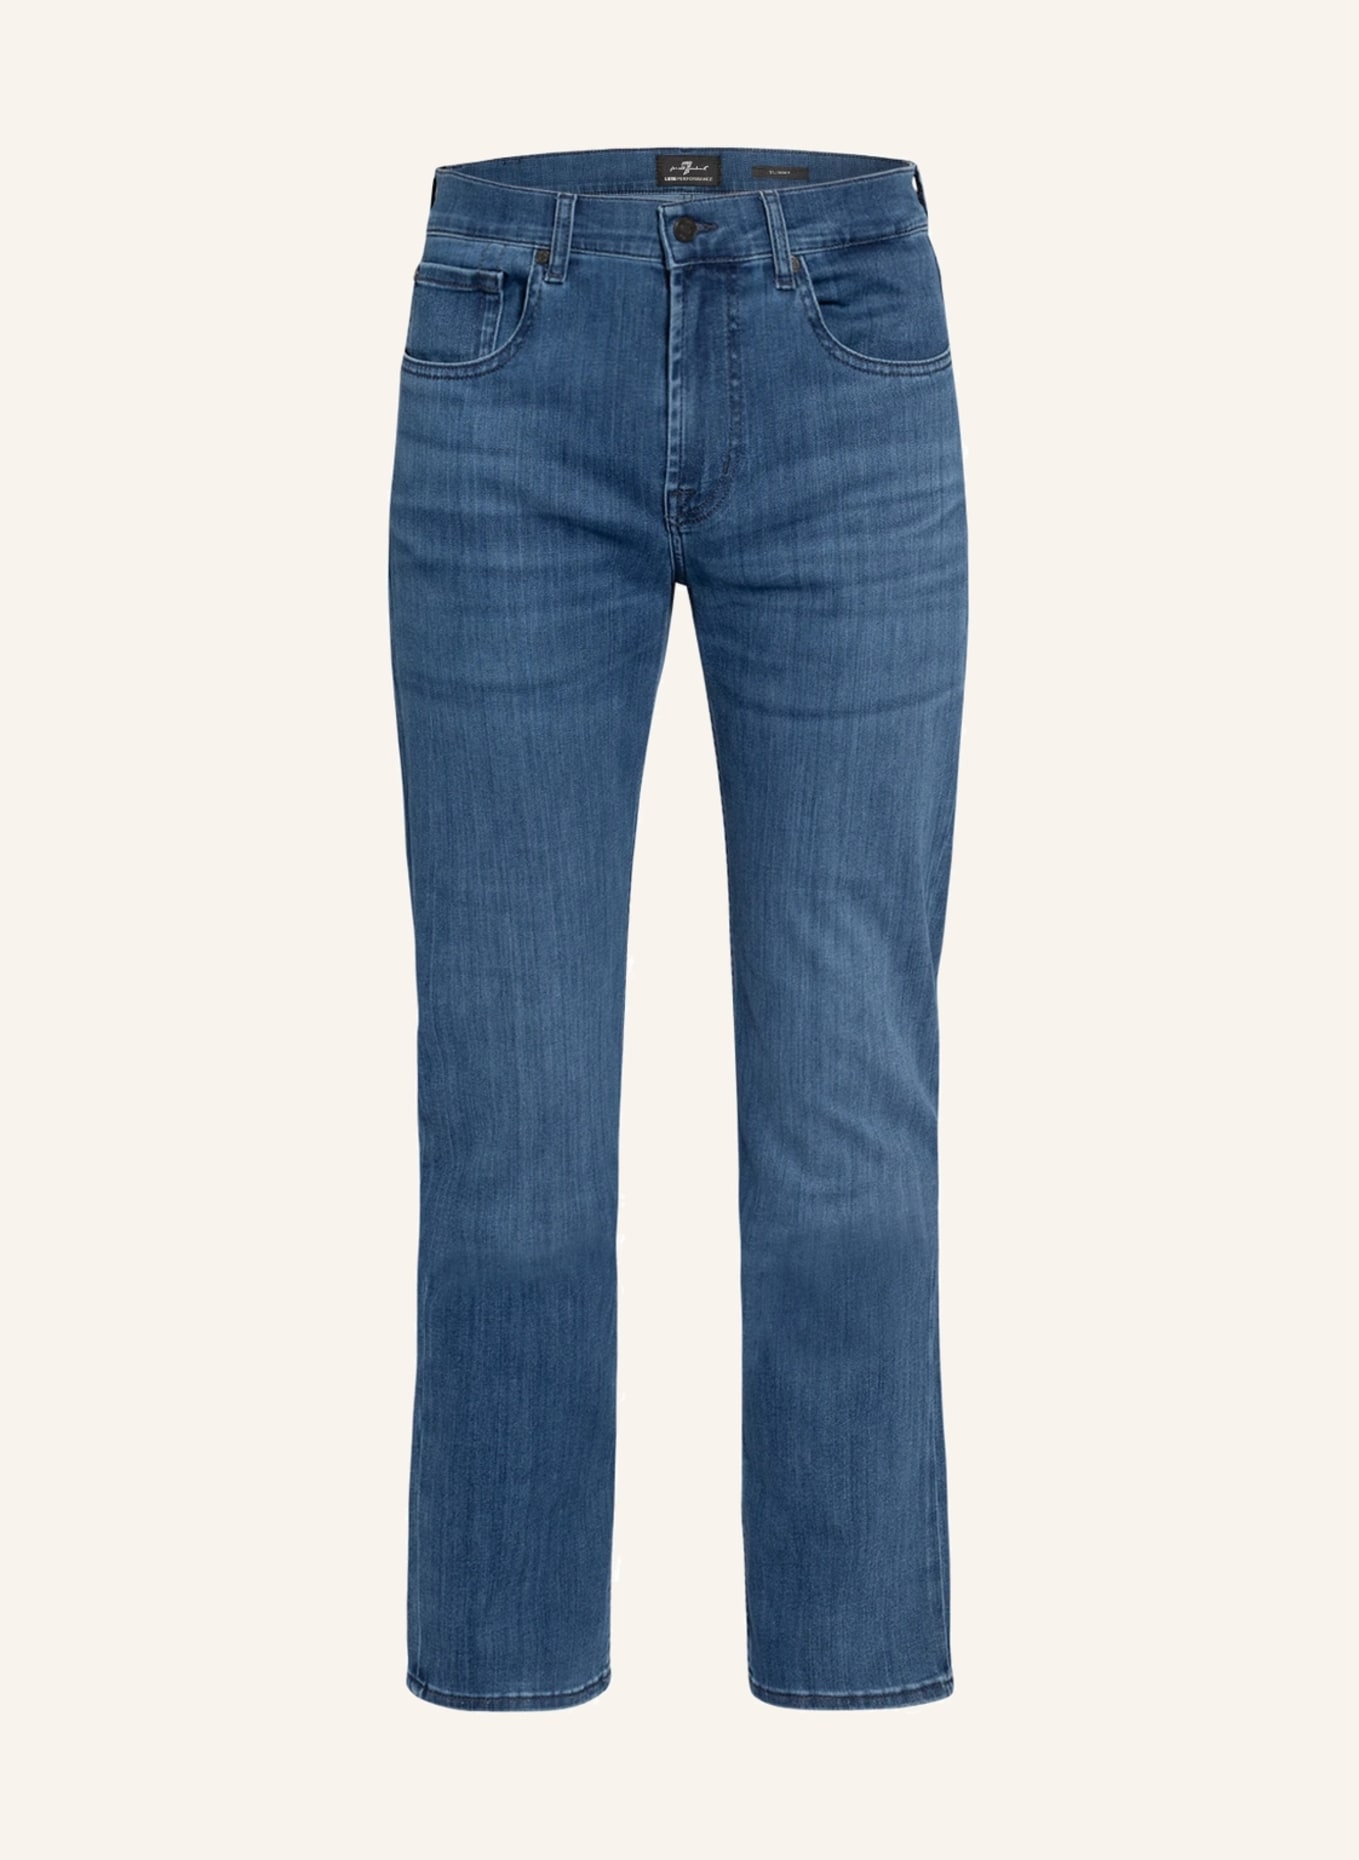 7 for all mankind Jeans SLIMMY Slim Fit, Farbe: MID	BLUE (Bild 1)